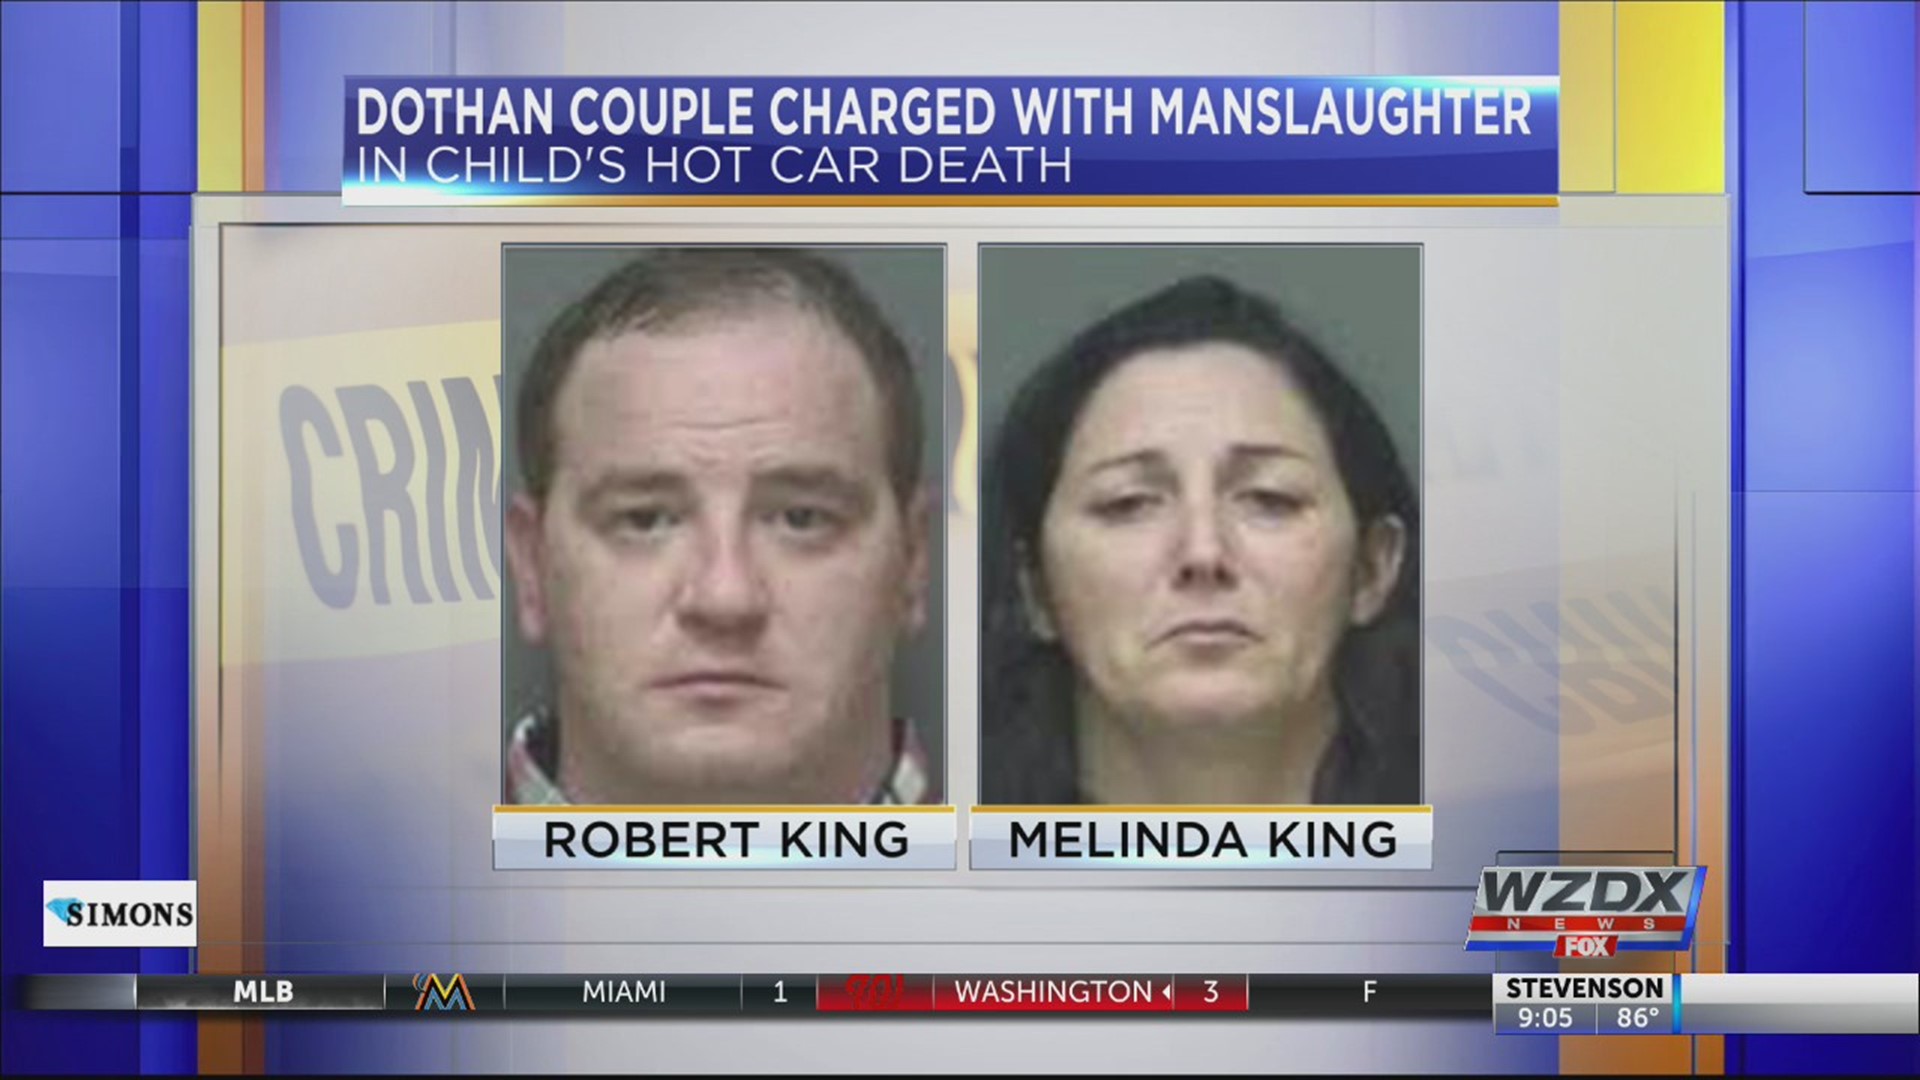 A Dothan couple has been charged with manslaughter after their two-year-old died in a hot car.